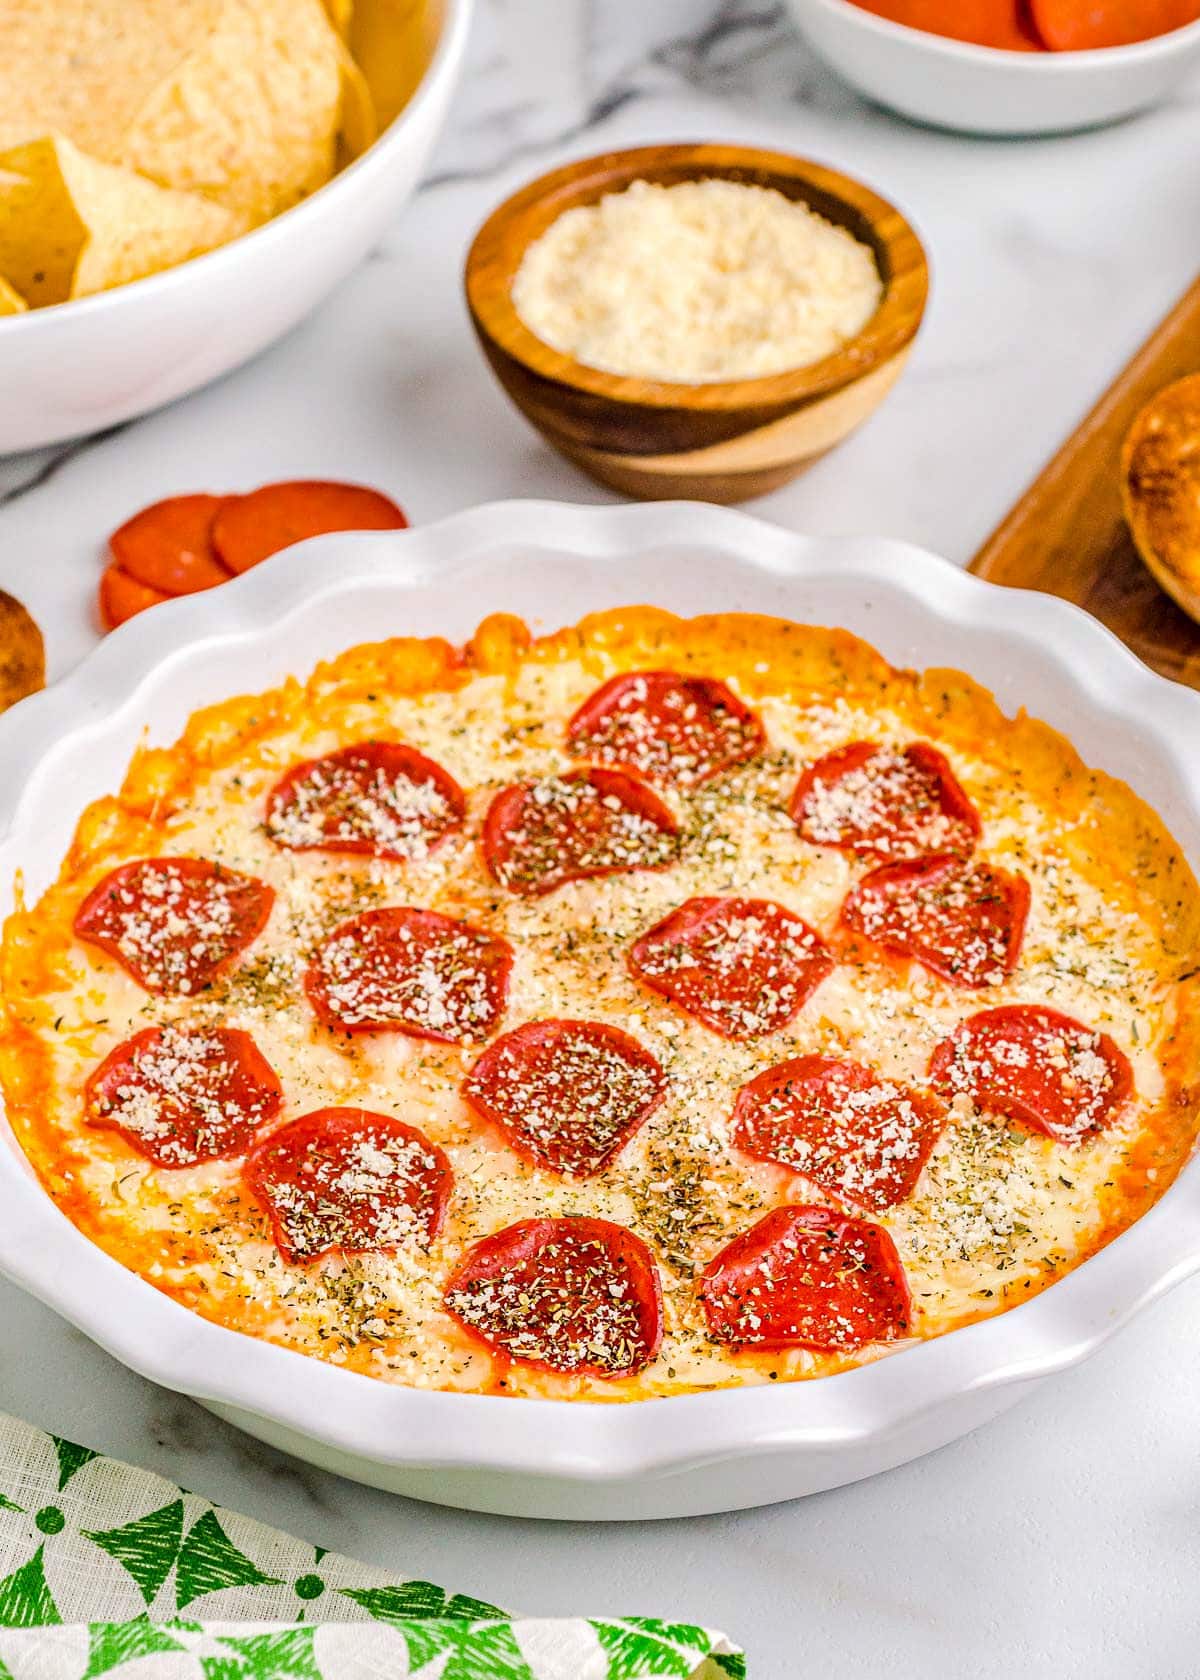 pizza dip baked in white pie dish topped with pepperoni and parmesan cheese. plate of toasted baguette and a bowl of chips are set off to the side.